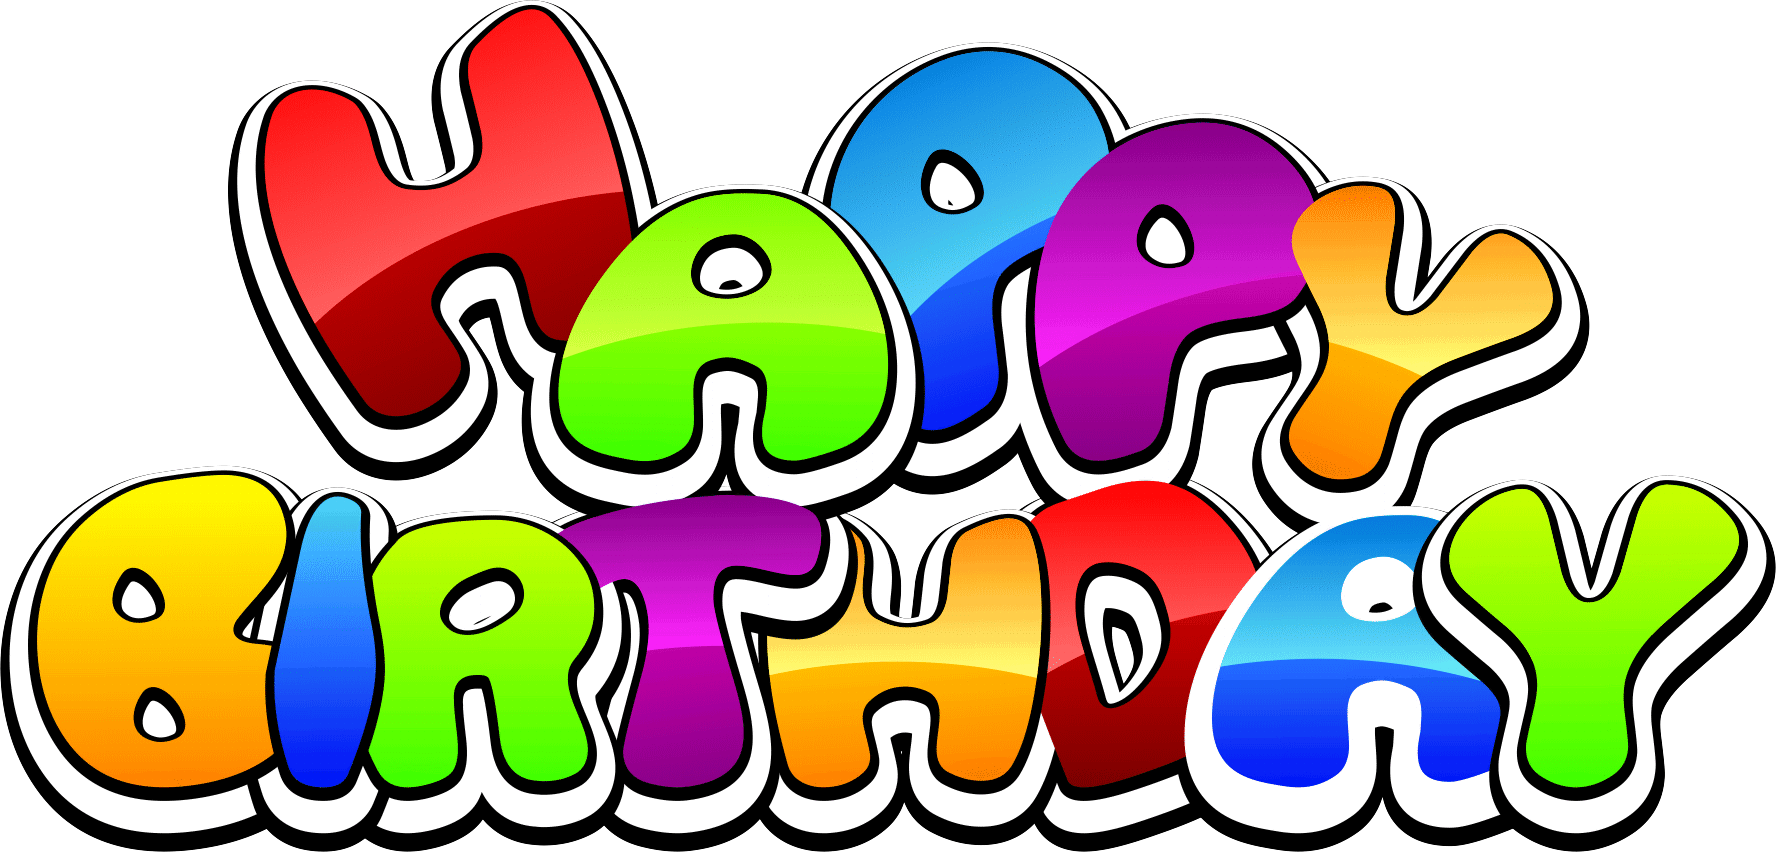 Volleyball clipart happy birthday. Png hd animated transparent